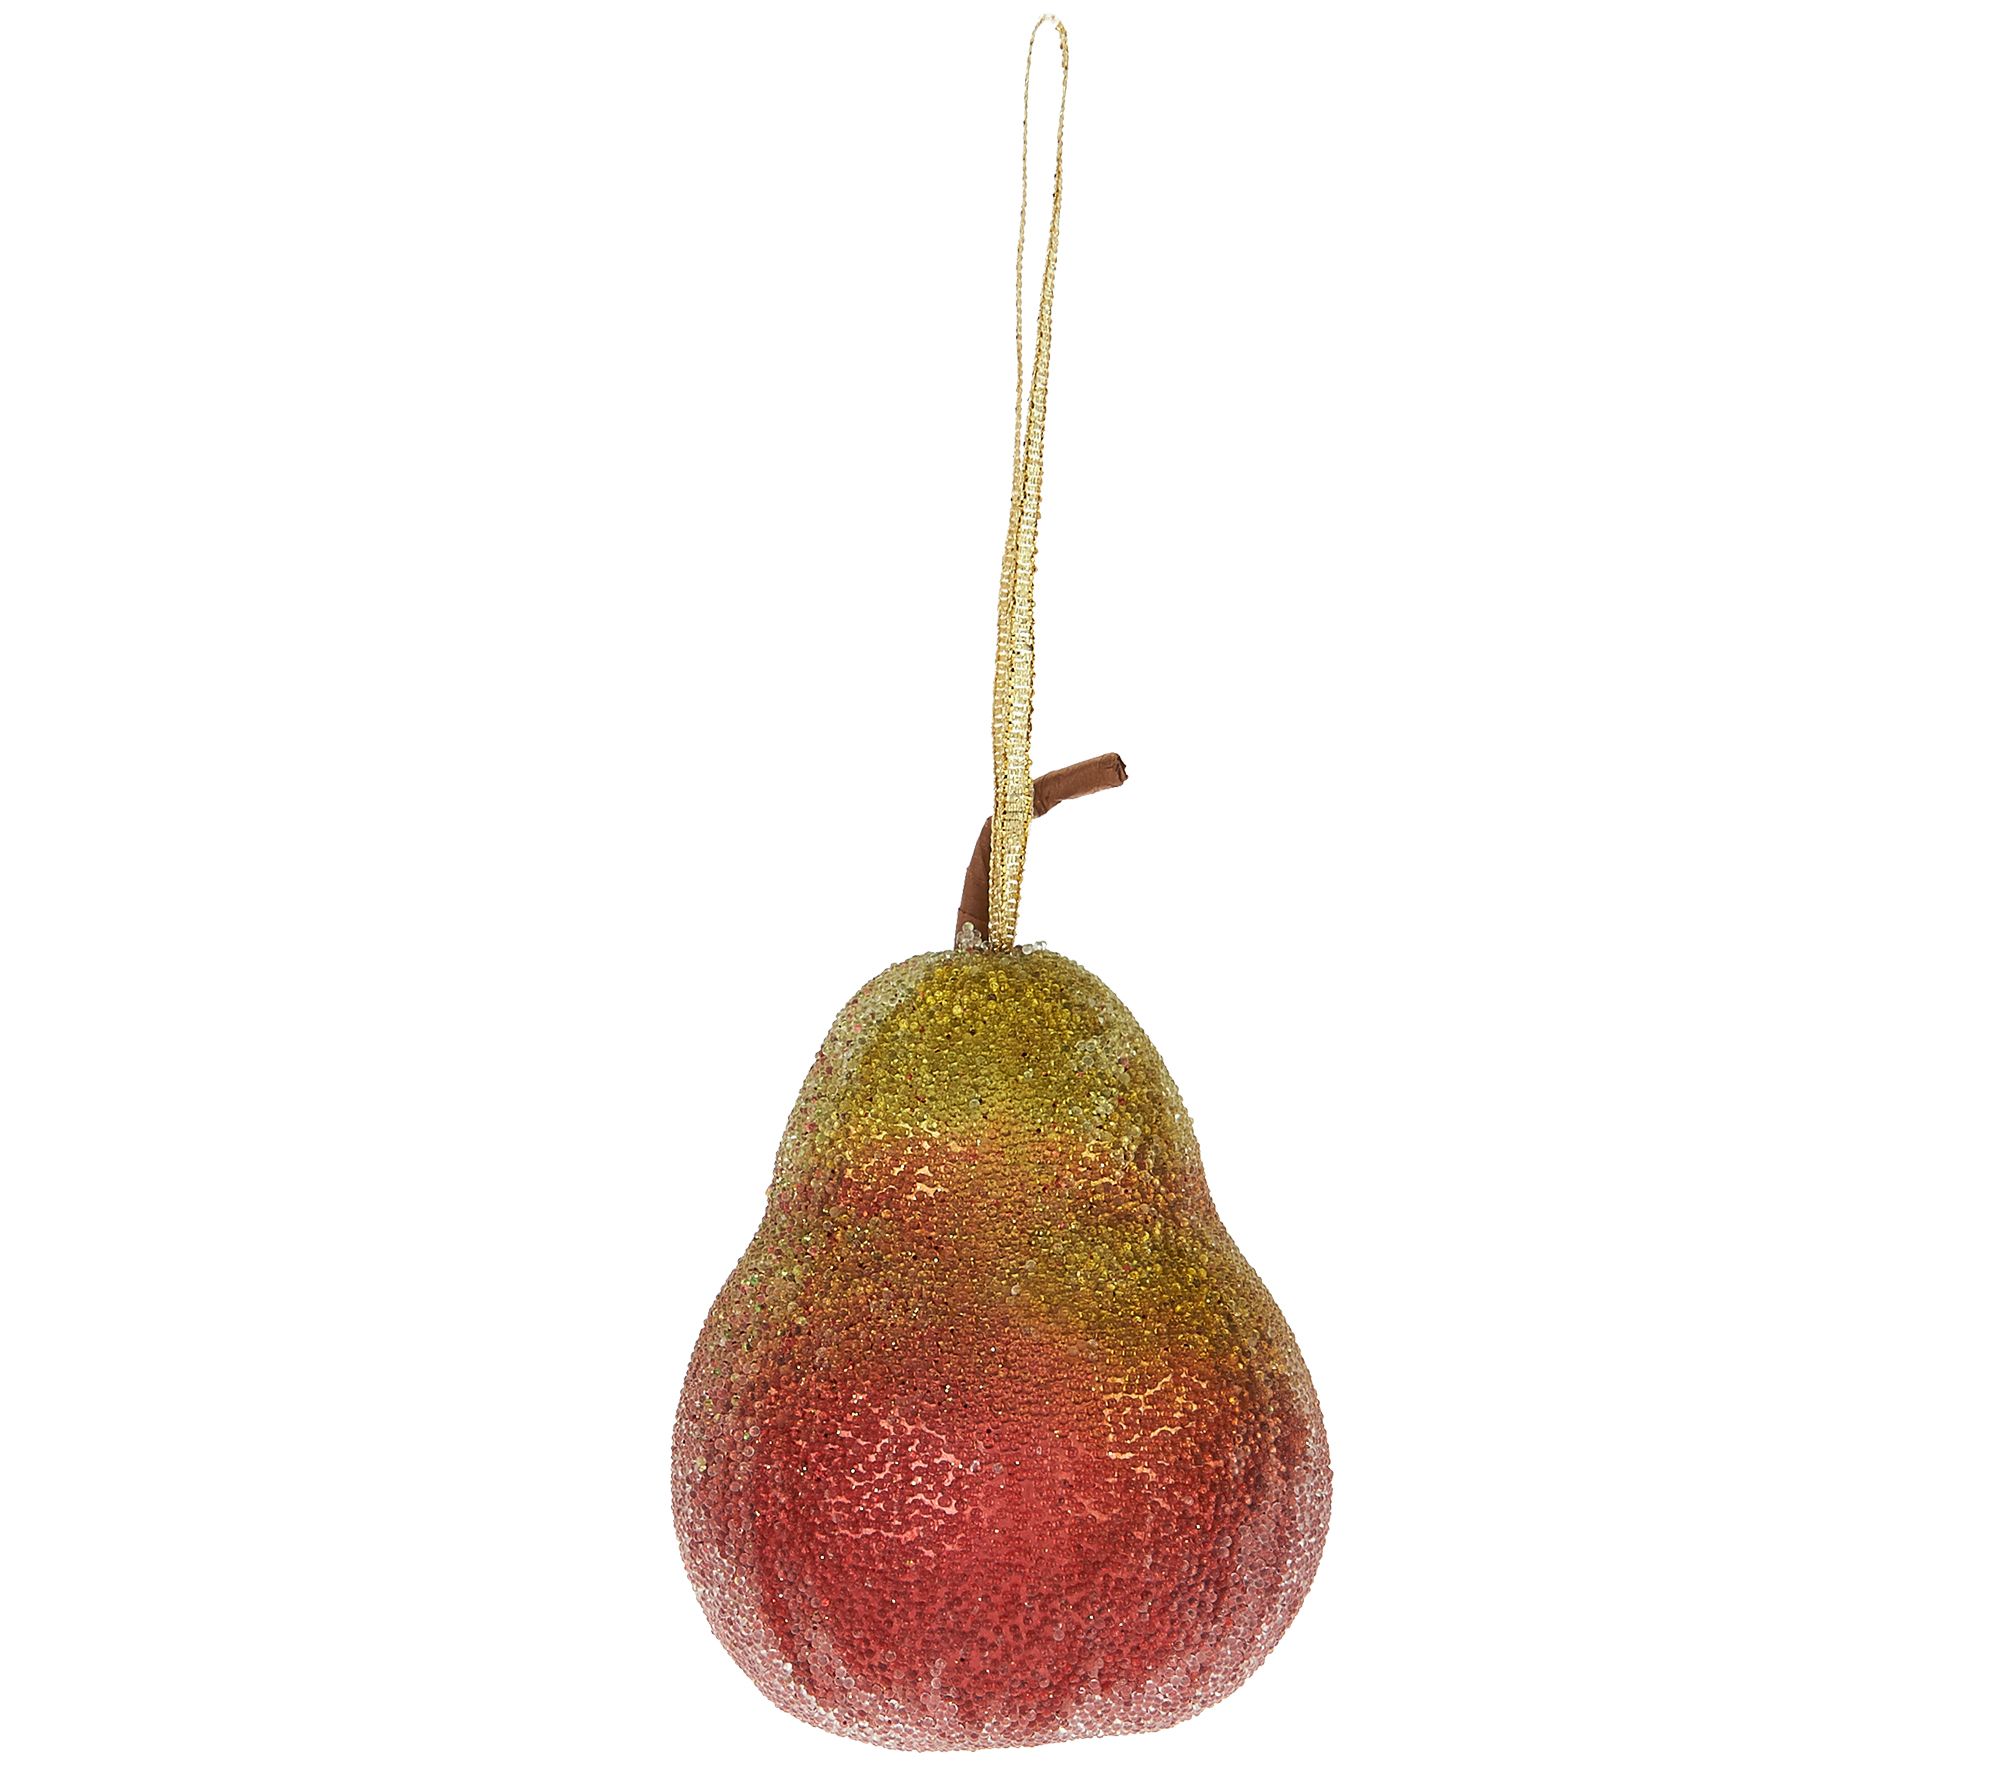 Pack of 6 Pears - Decorative Faux Fruit by Val erie 